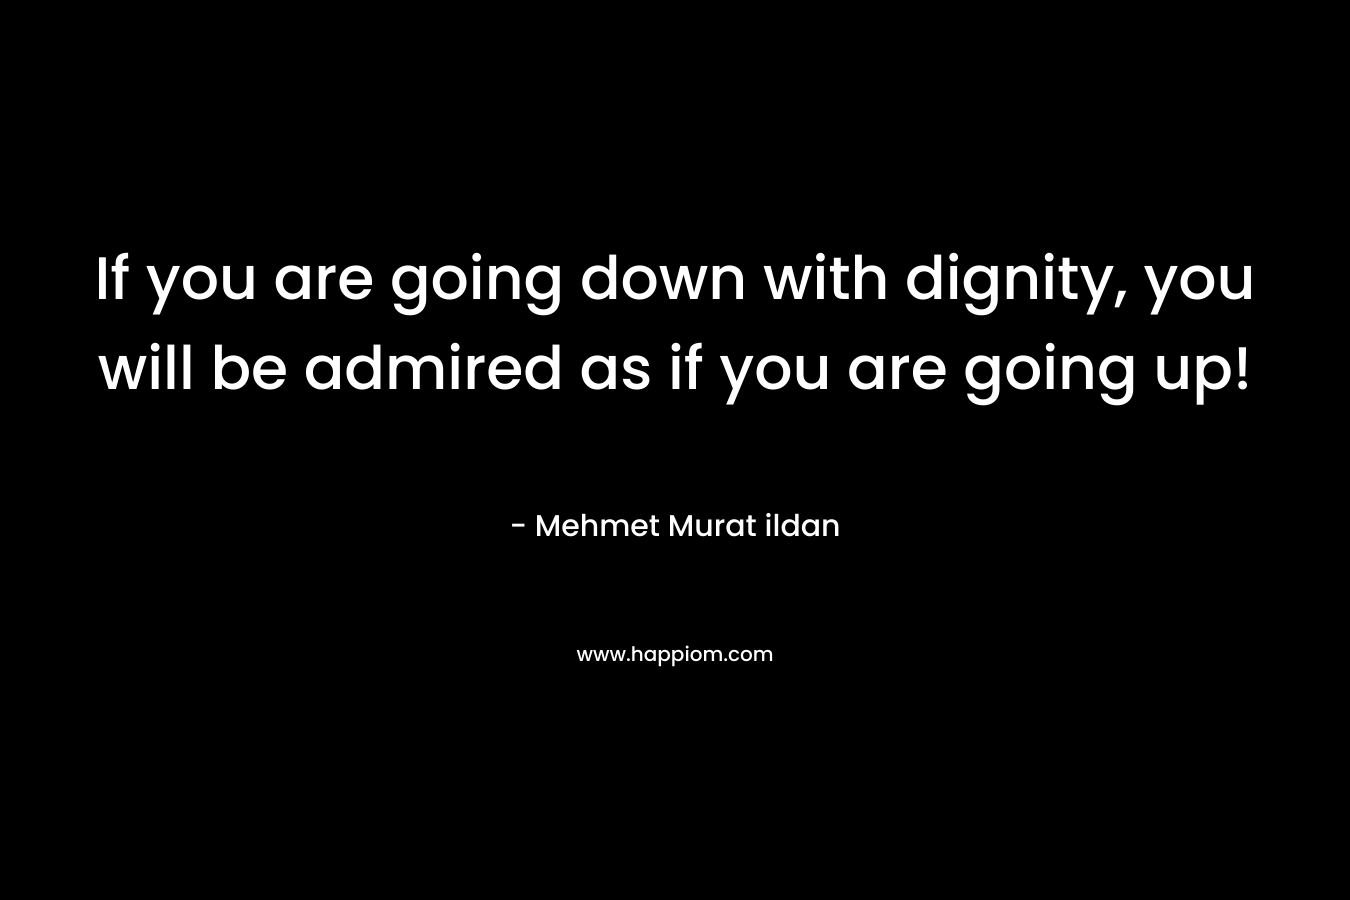 If you are going down with dignity, you will be admired as if you are going up! – Mehmet Murat ildan